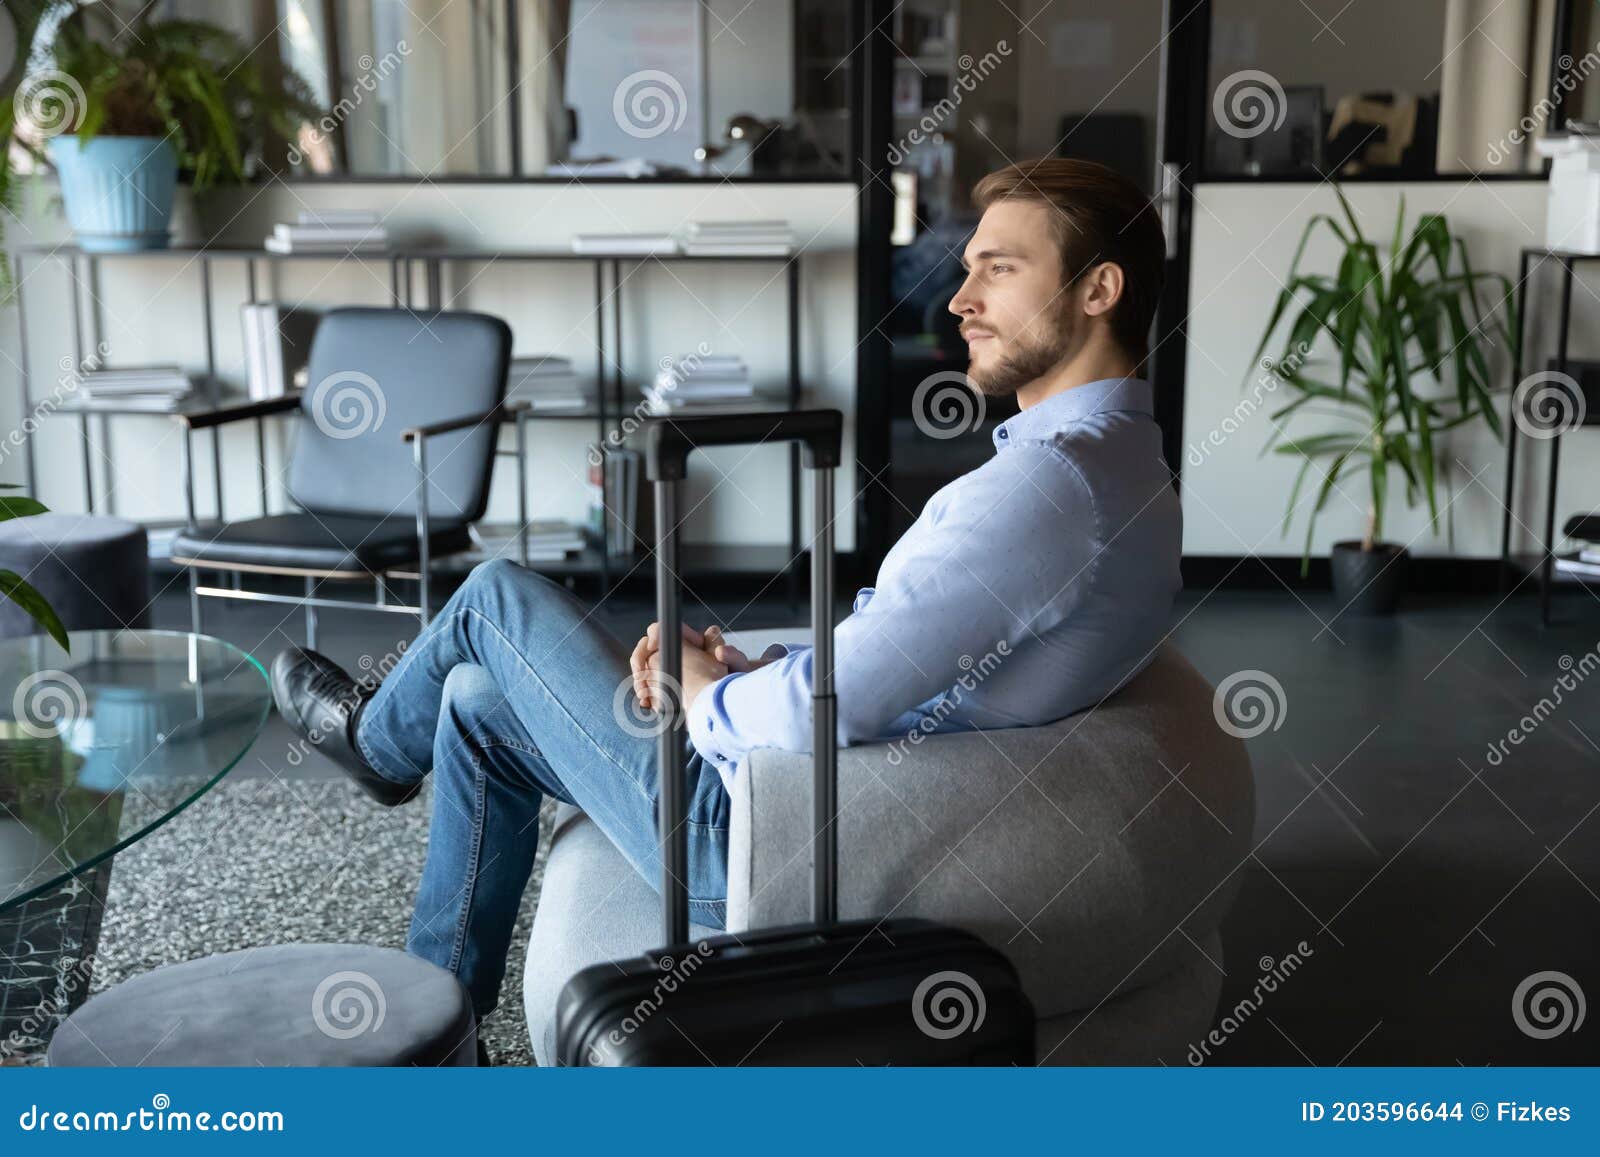 capable millennial male expert travelling on business waiting for meeting